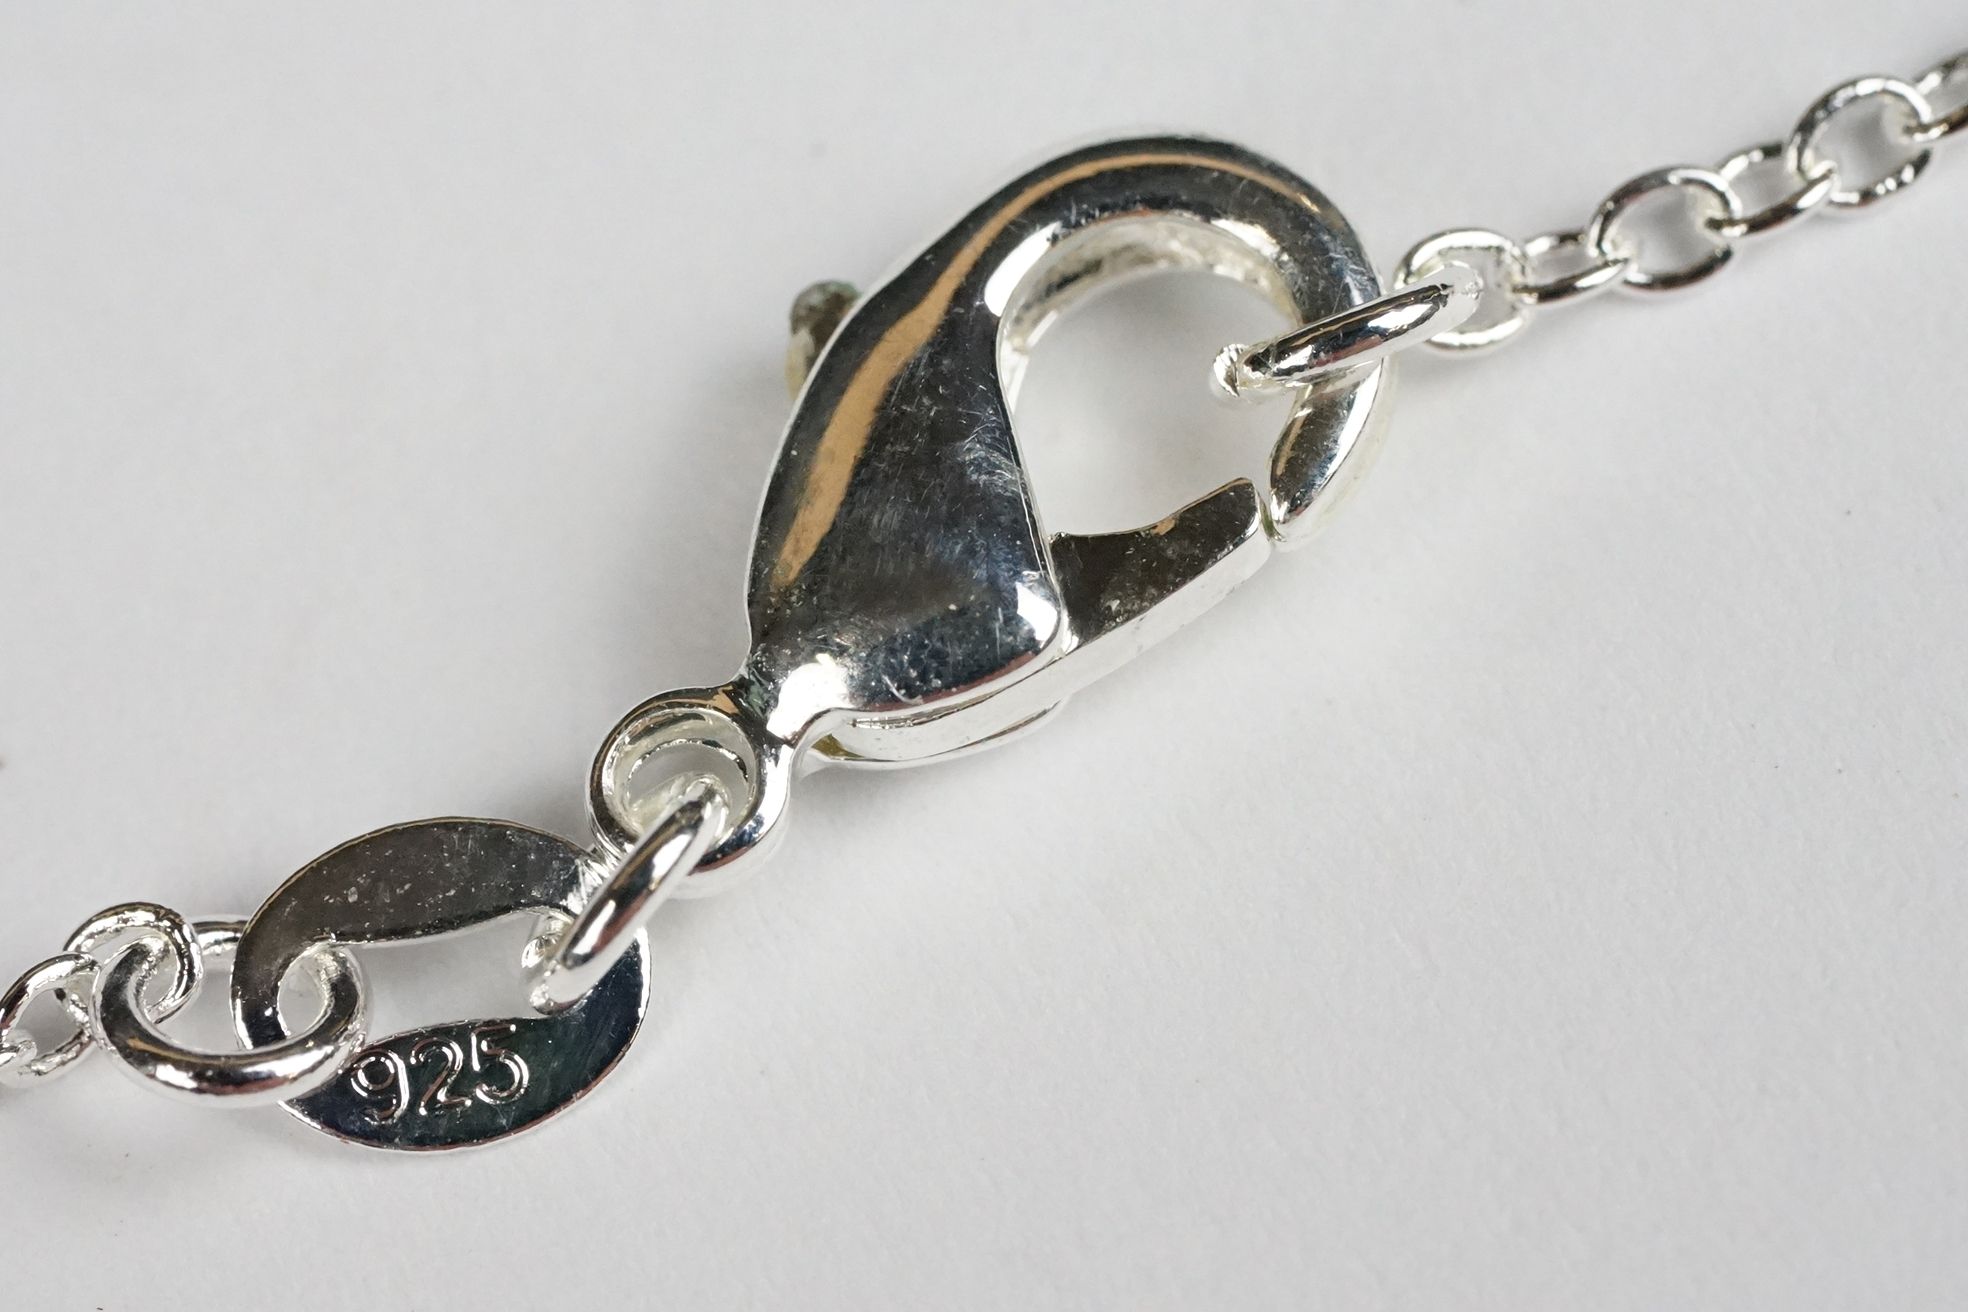 Silver Moon and Cat Pendant Necklace - Image 7 of 7